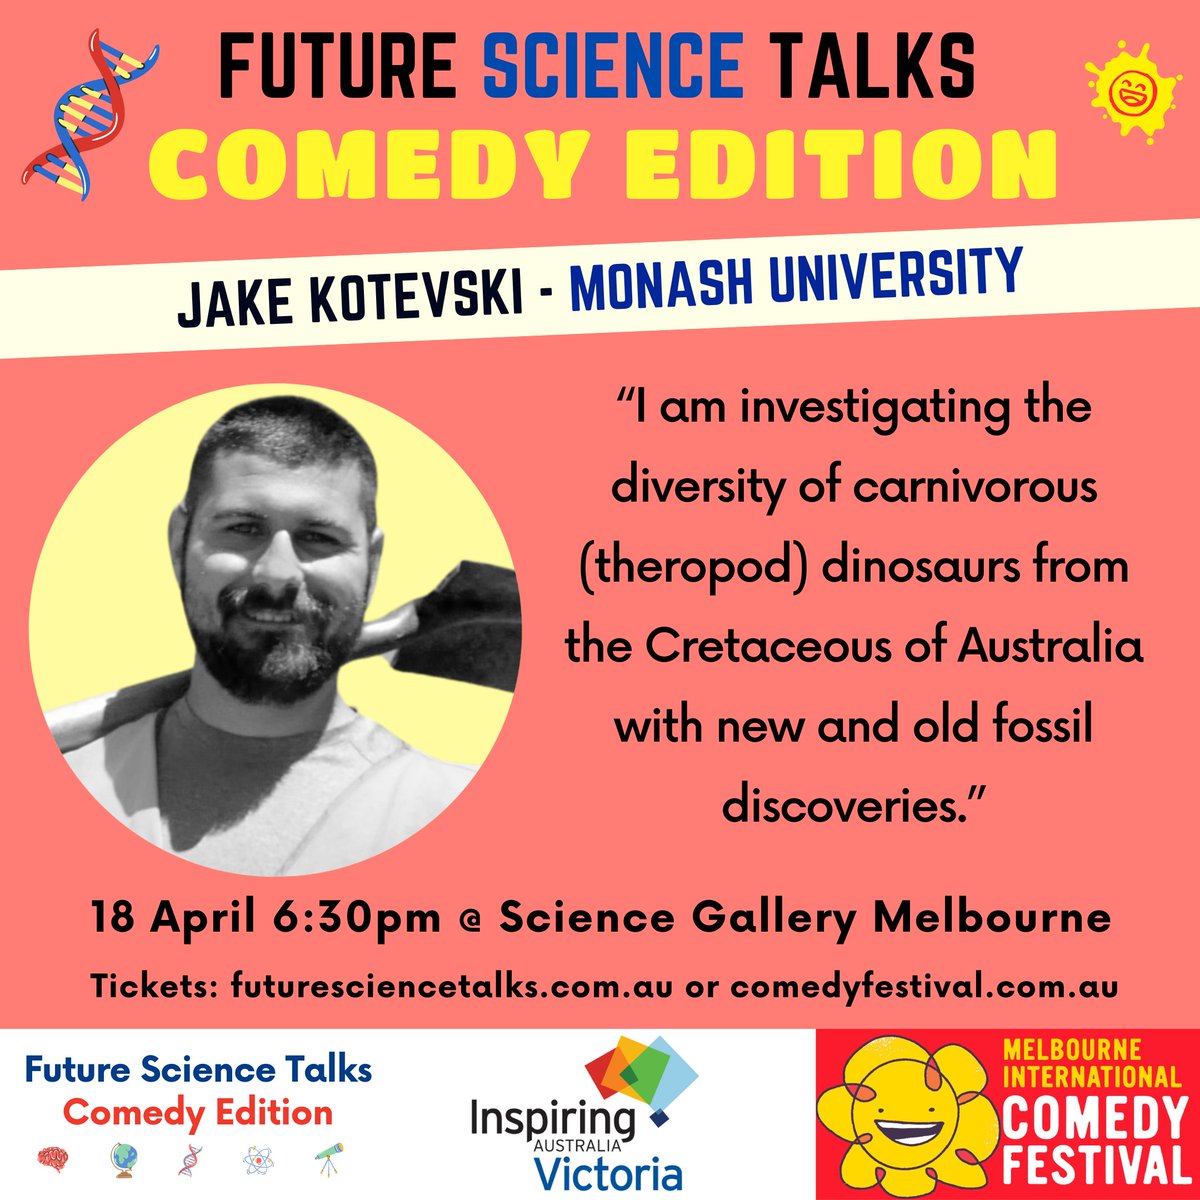 We are so excited to have these speakers at @scigallerymel on Thursday 🙌 Cannot wait to hear their #ScienceComedy talks! Come along on Thursday to see them 🤩 More info via the Melbourne International Comedy Festival link: comedyfestival.com.au/2024/shows/fut…